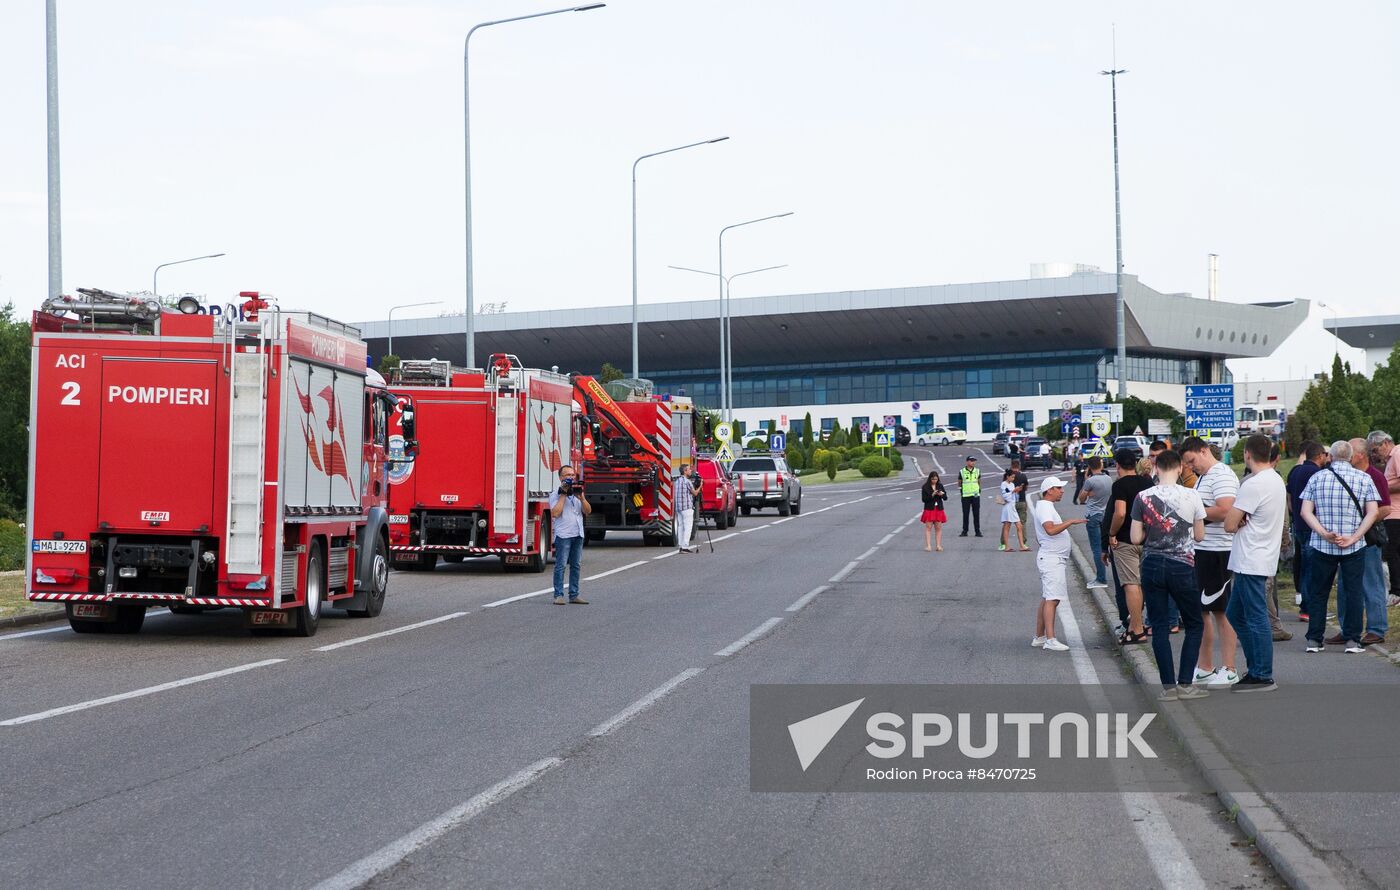 Moldova Airport Security Incident